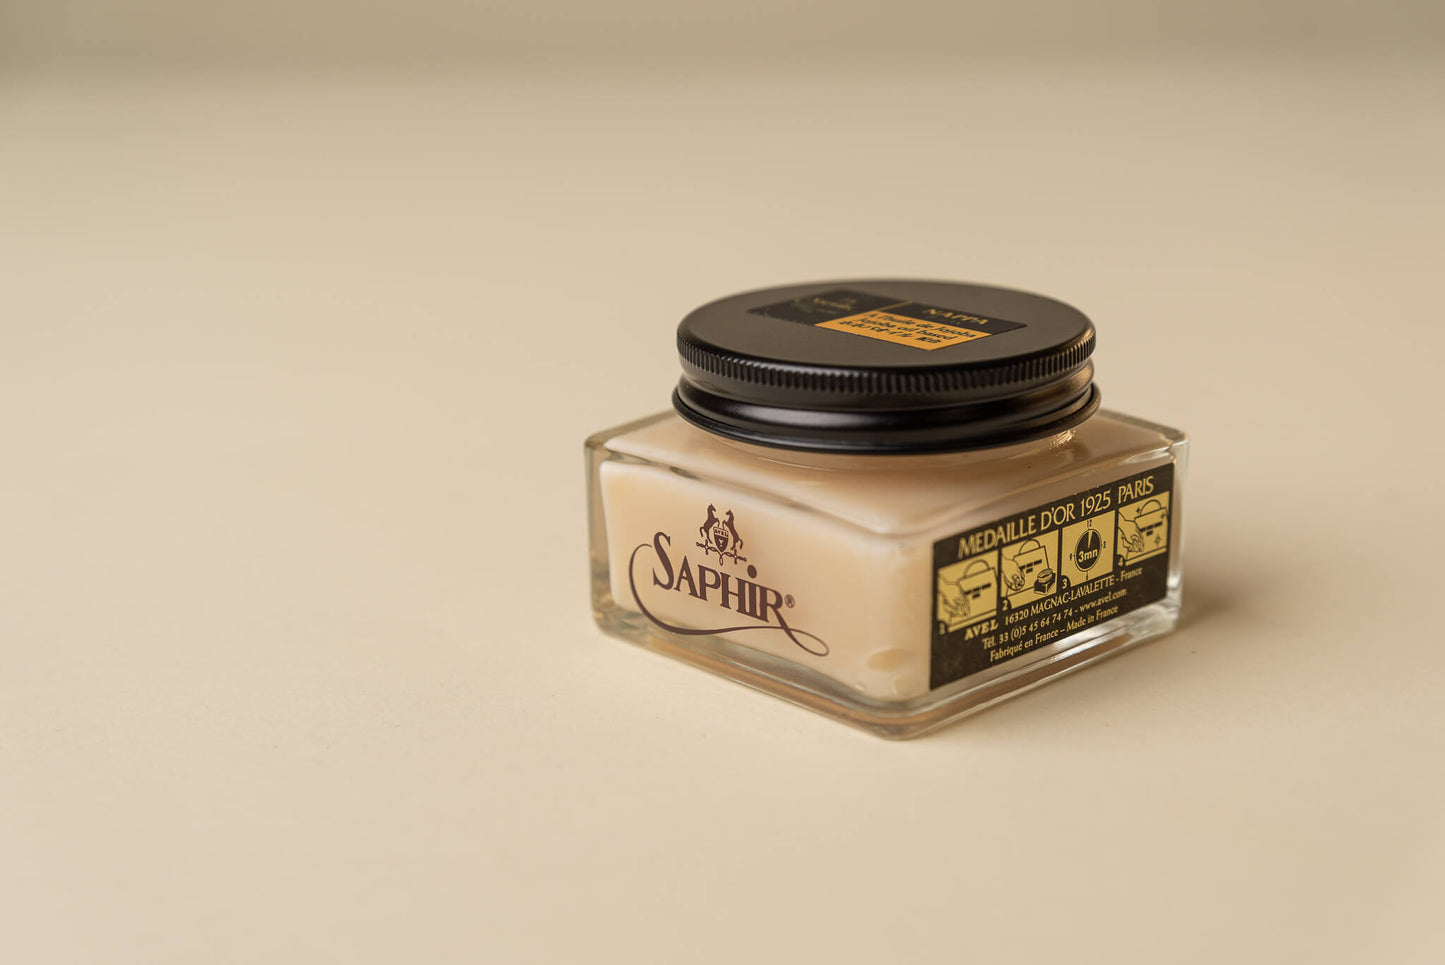 Saphir Medaille d'Or 1925 Nappa Cream - Brillare Shoe Care - Official Saphir Reseller